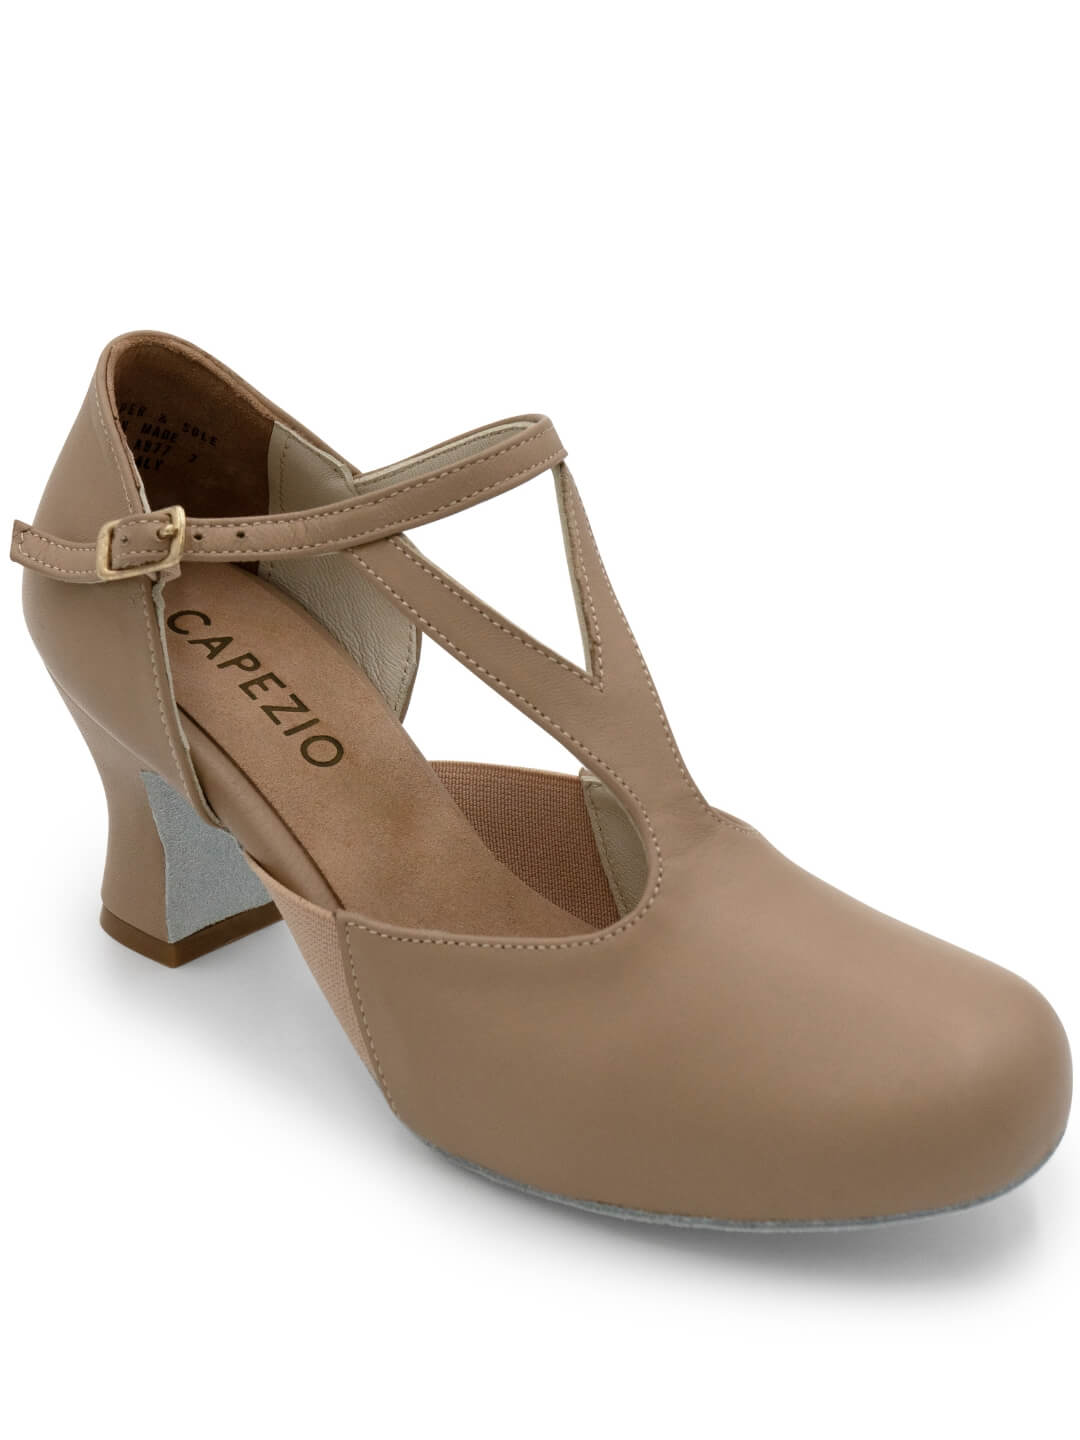 Italian Handcrafted Y-Strap Charlotte Character Shoe